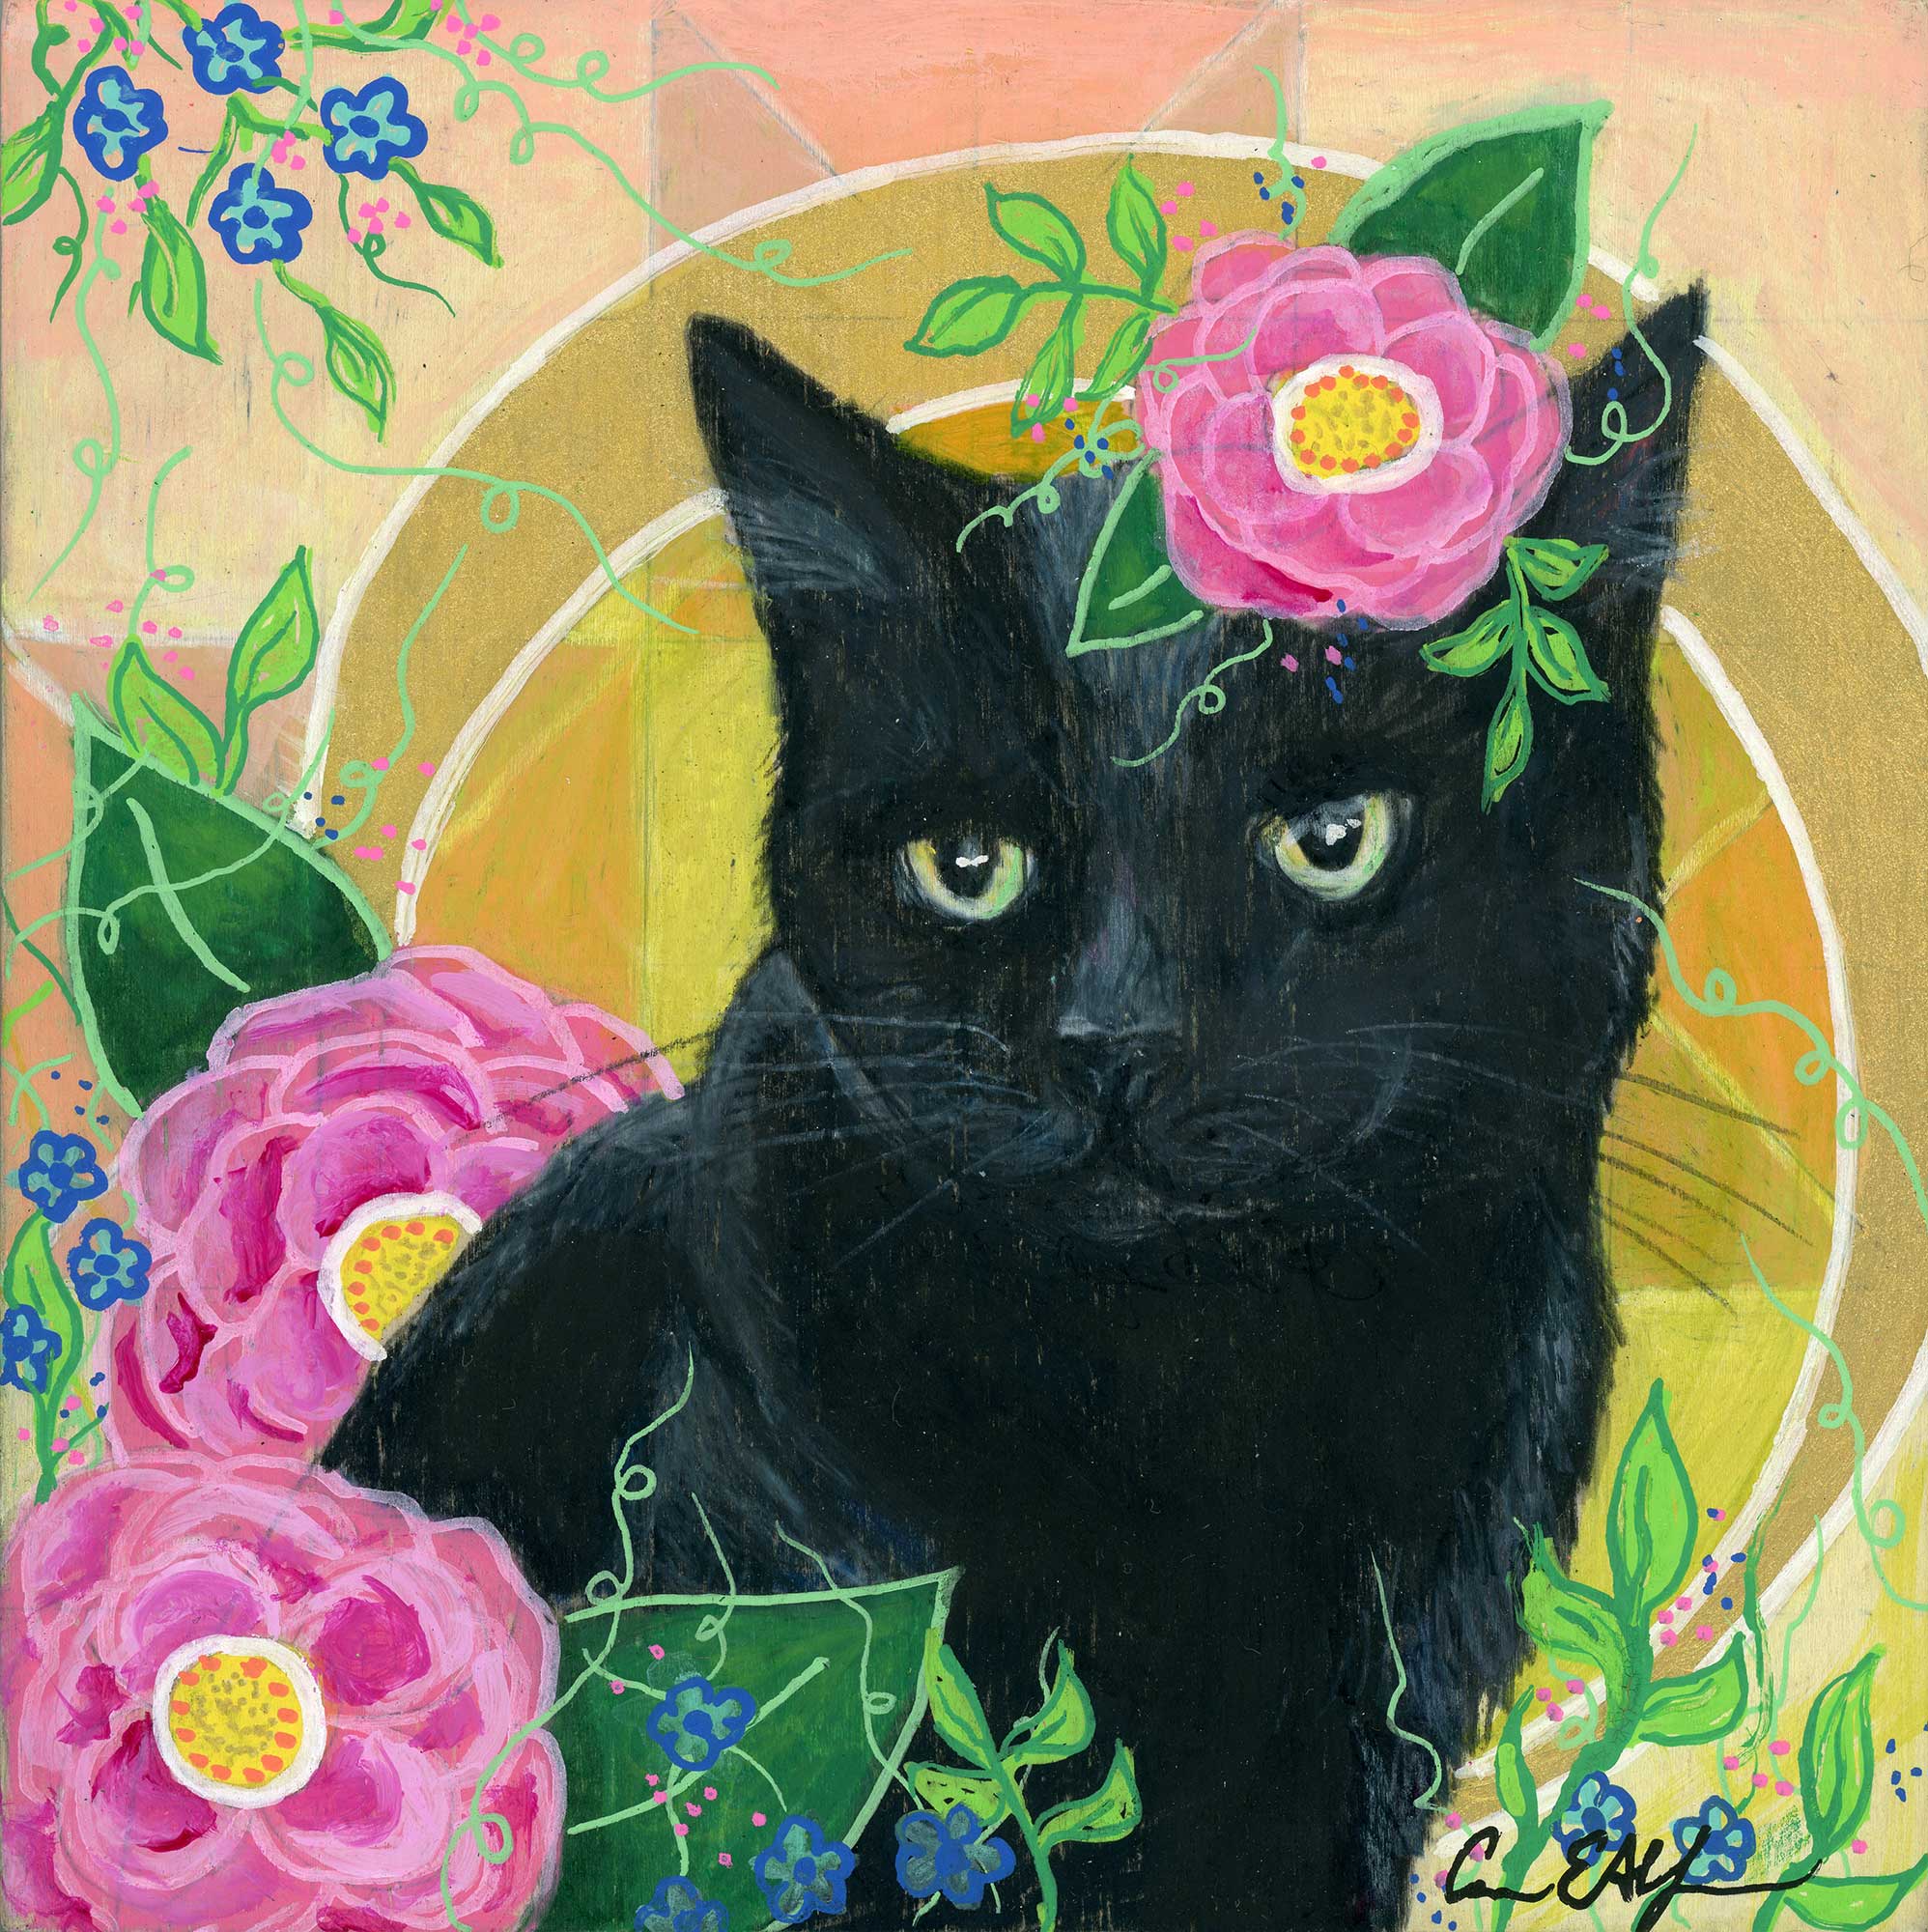 SOLD - "Black Cat and Camellias", 6" x 6", mixed media